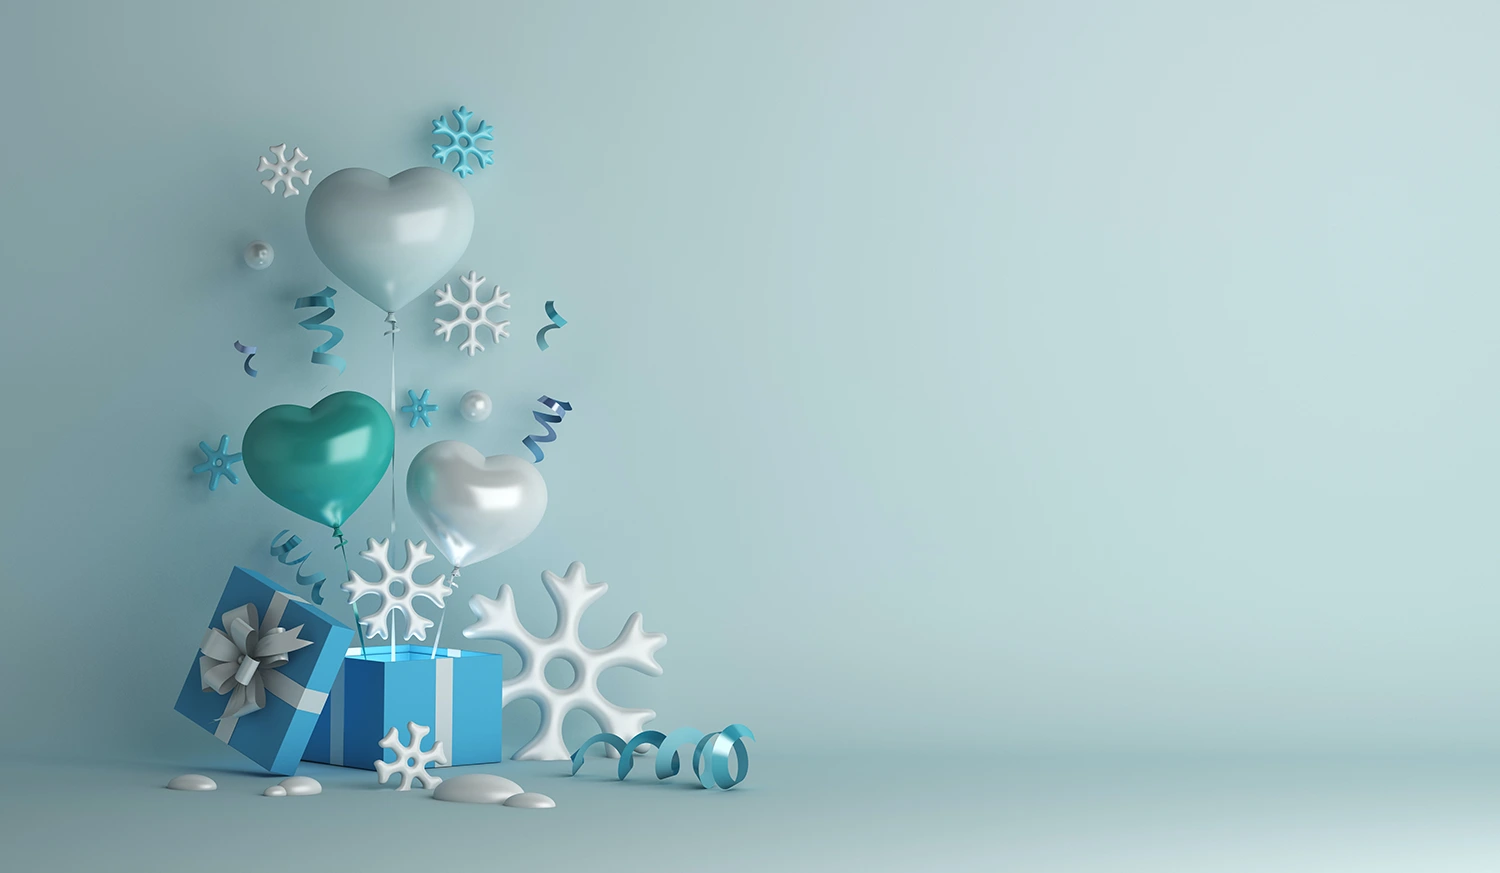 A blue box with snowflakes on a blue background.